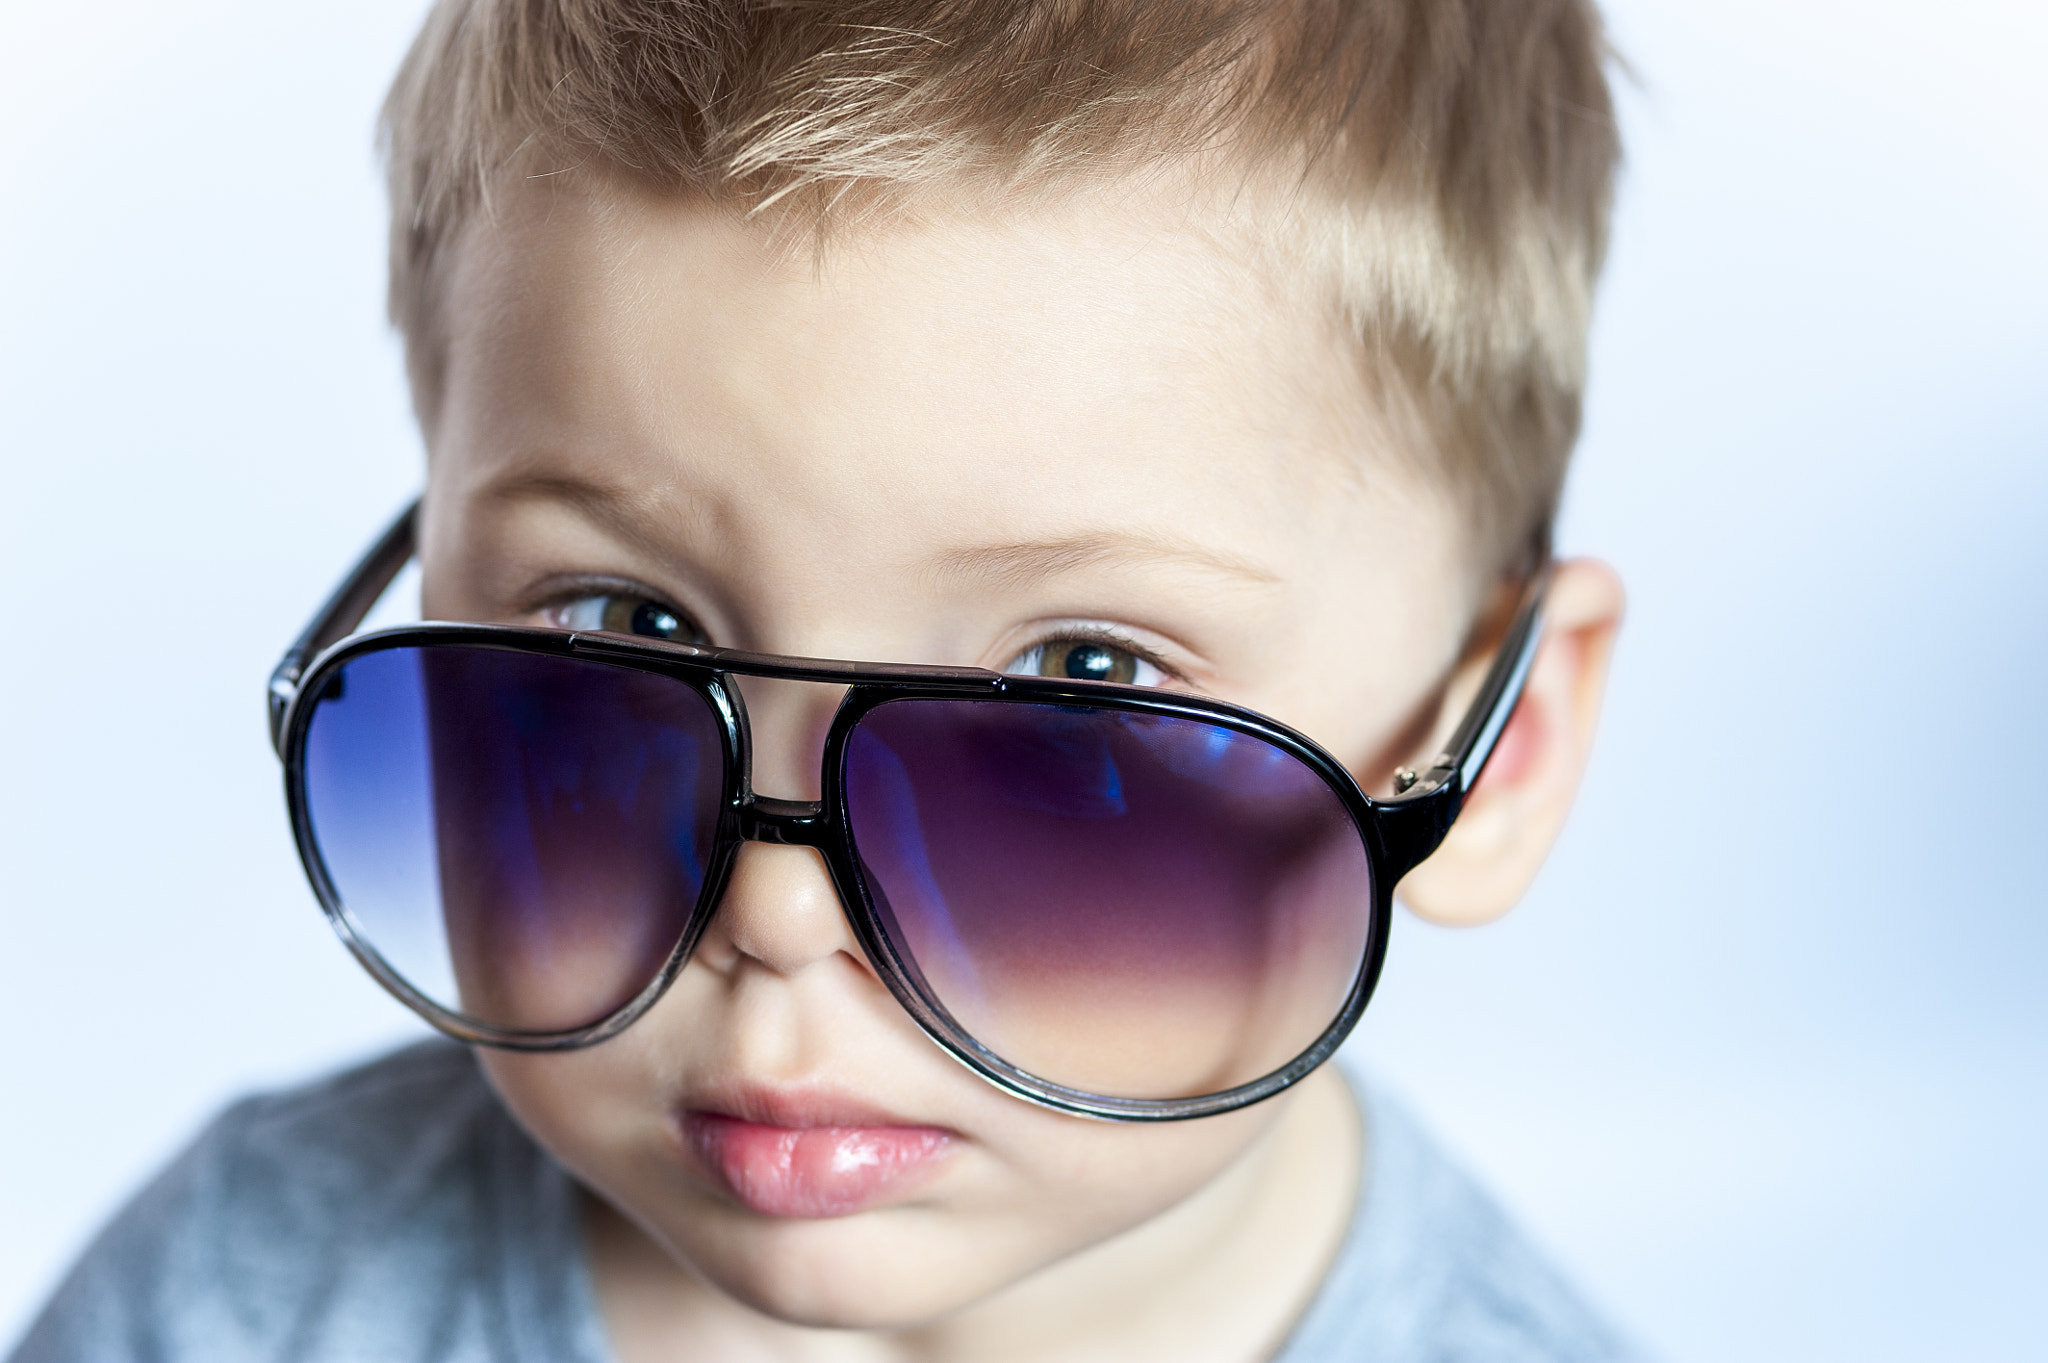 Nikon D700 sample photo. Charming three years old boy in sunglasses photography